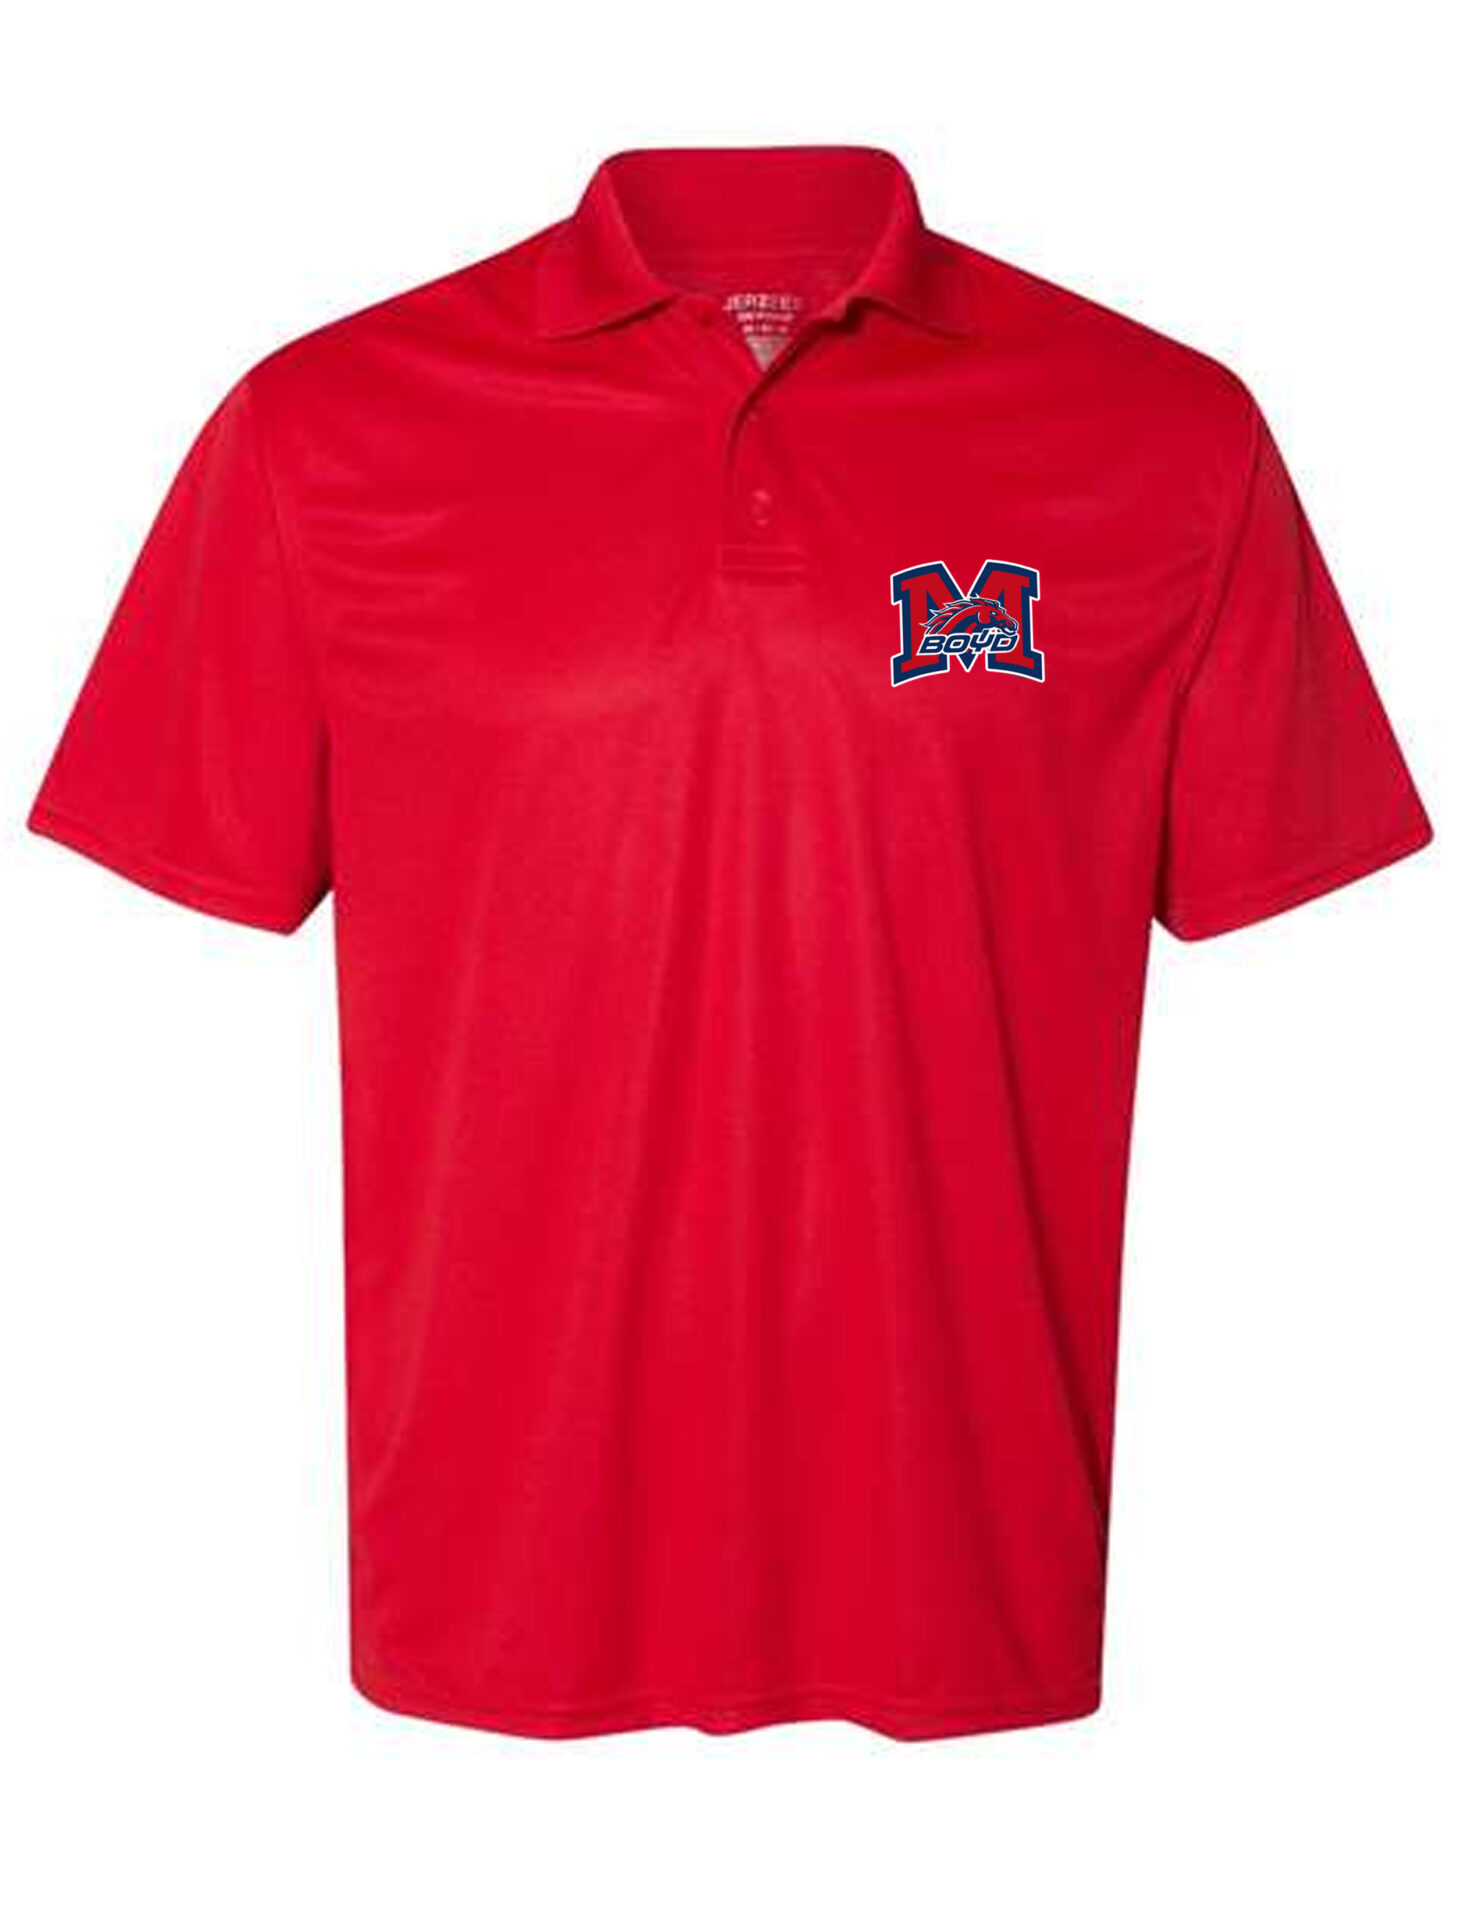 A red polo